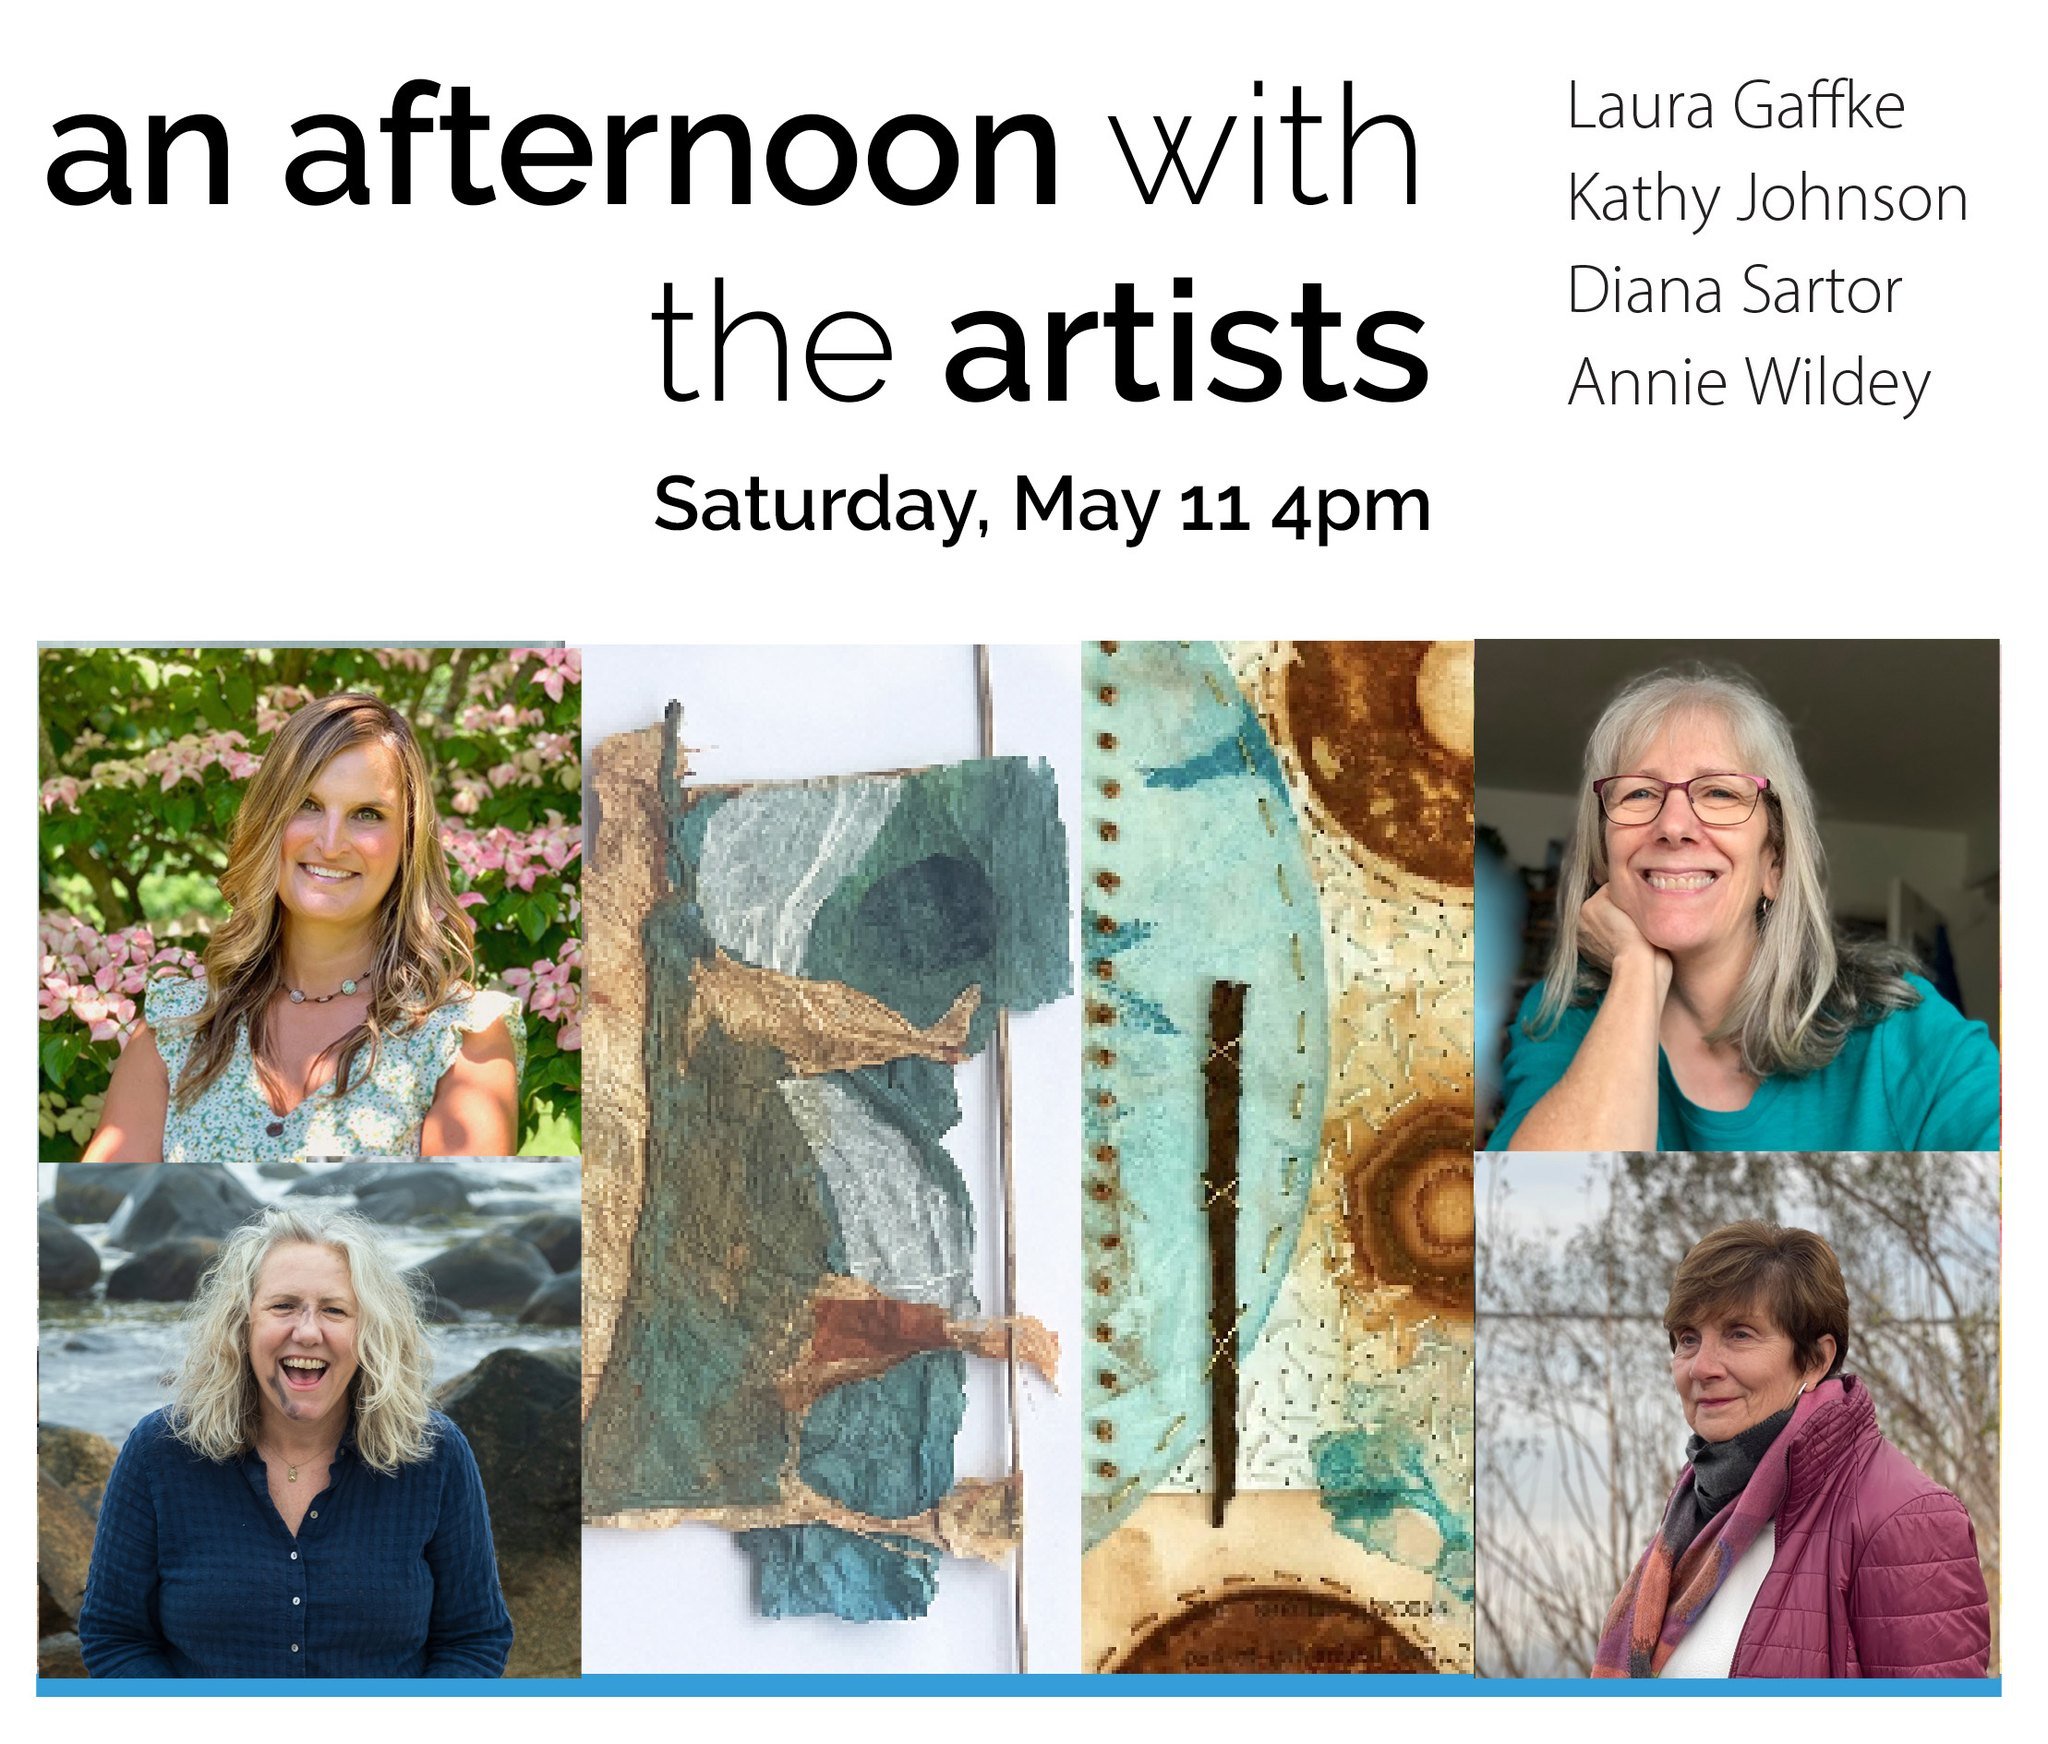 Come join us for an afternoon with the artists in our current exhibition 'In the company of women'. A casual gathering to chat and explore the exhibition with artists Laura Gaffke, Kathy Johnson, Diana Sartor and Annie Wildey.

This is a lovely chanc